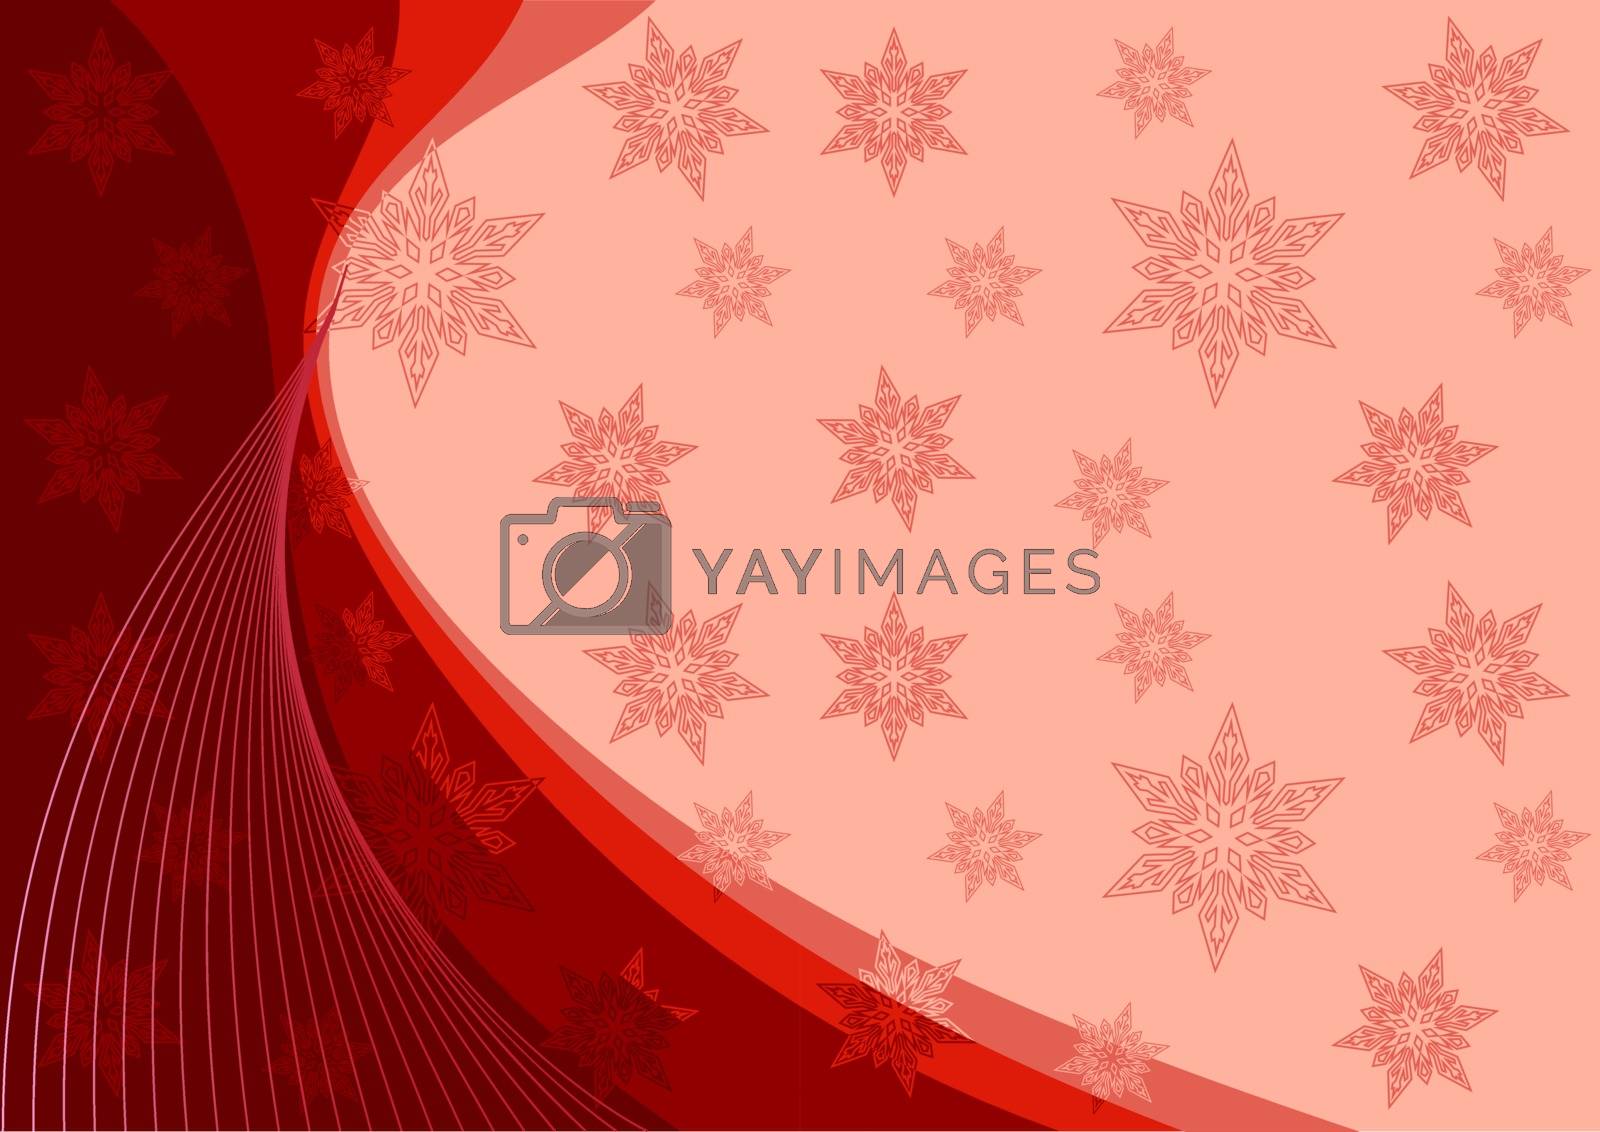 Royalty free image of Greeting card for Christmas and New Year by rodakm